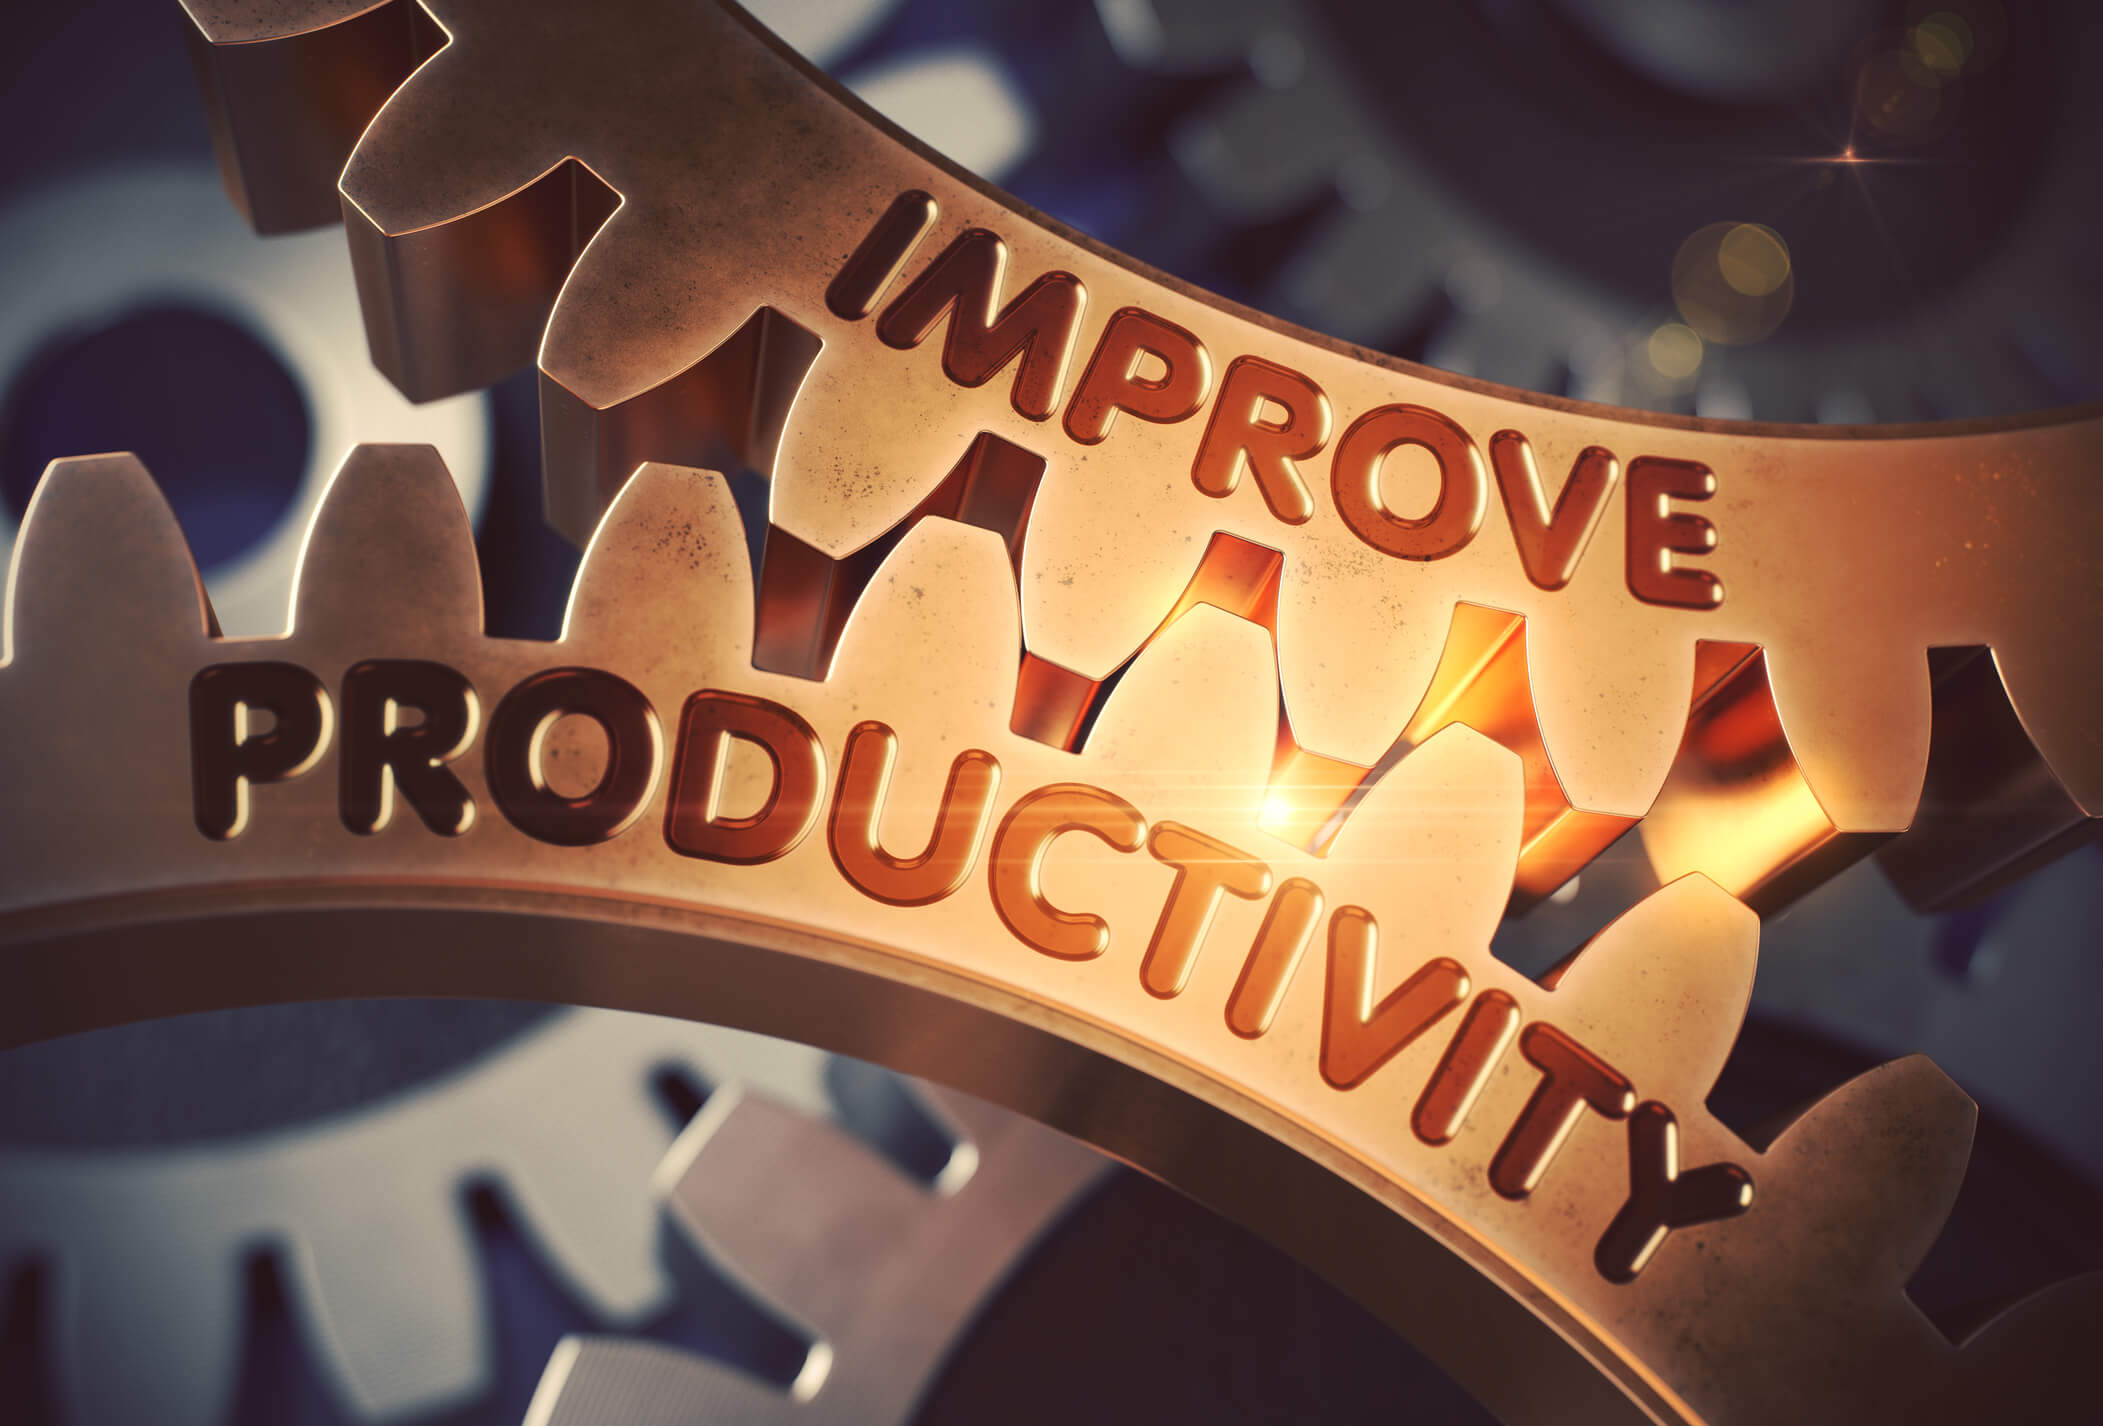 The words improve and productivity on gears